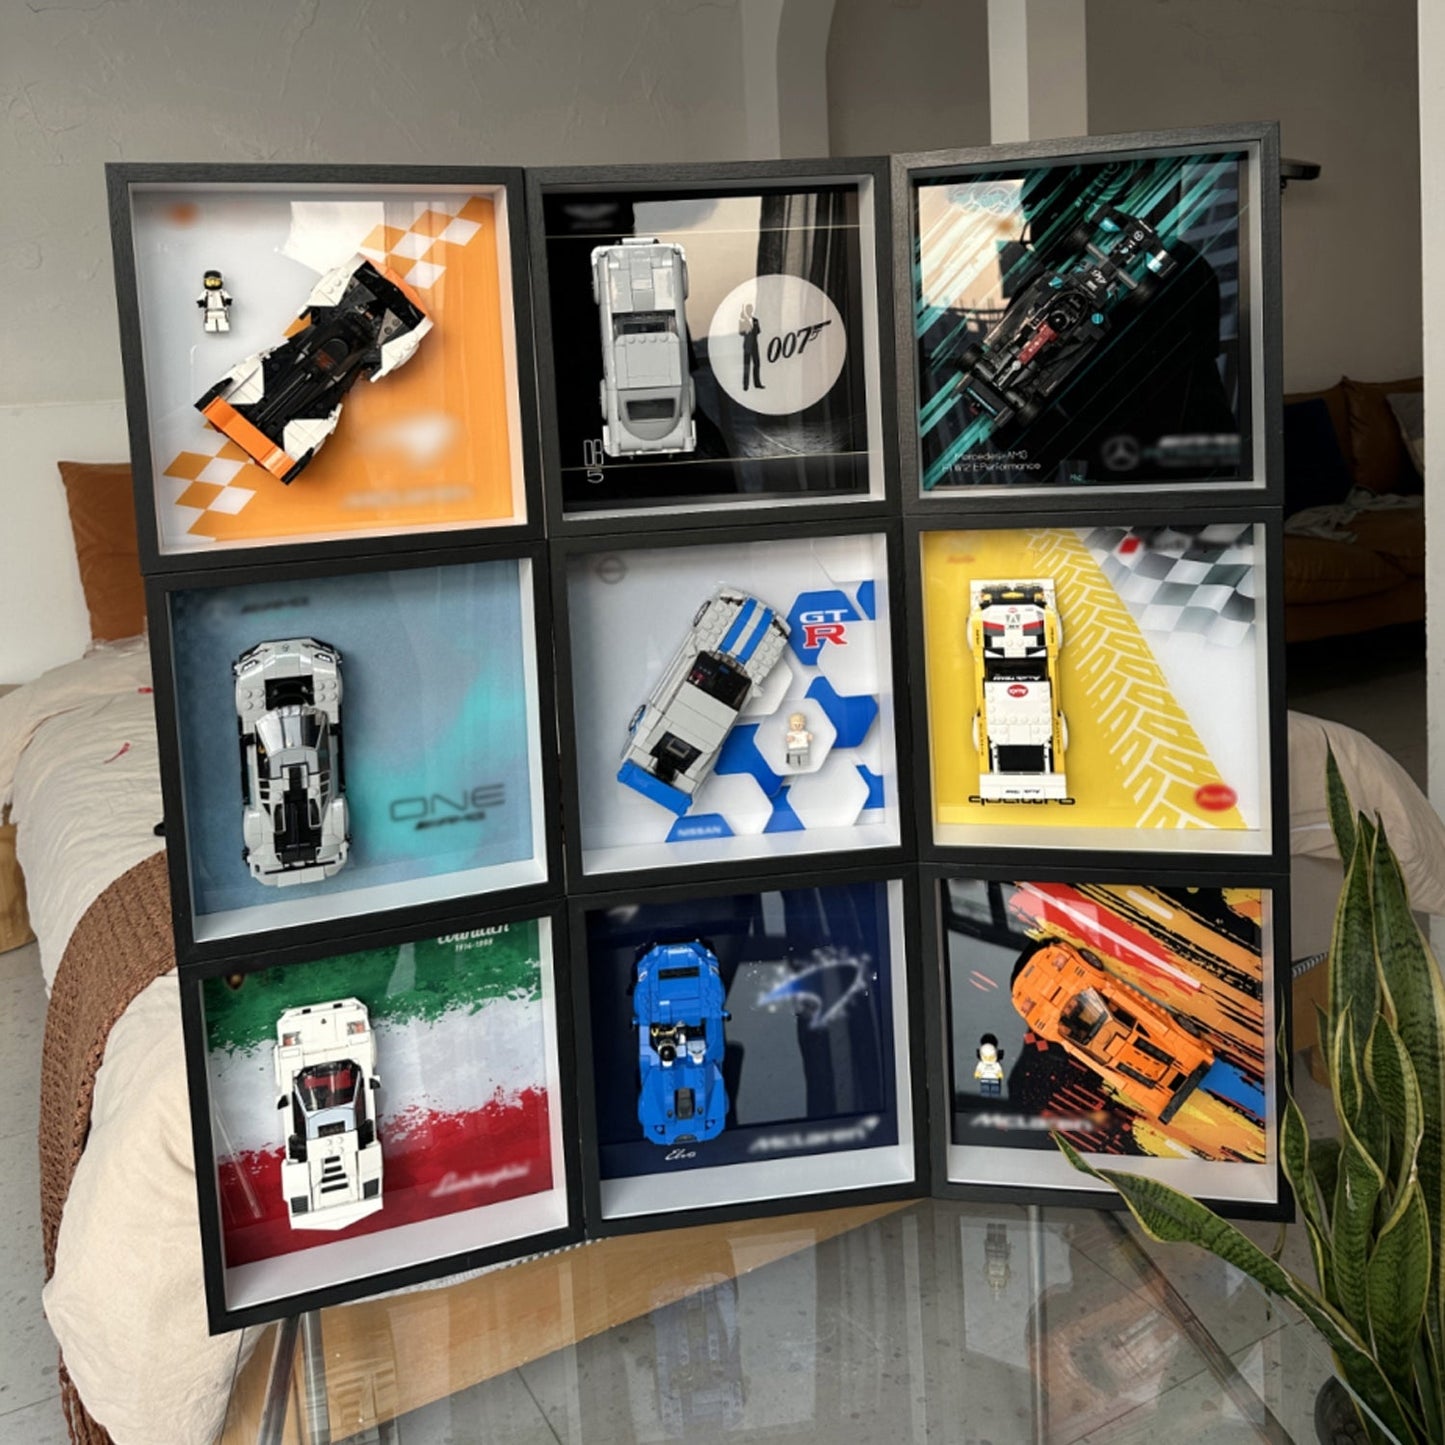 iLuane Display Wallboard for Lego Speed Champions Jaguar I-PACE eTROPHY 76898-2, Adult Collectibles Lego Car Wall Mount, Gifts for Lego Lovers(Only Display Wallboard)